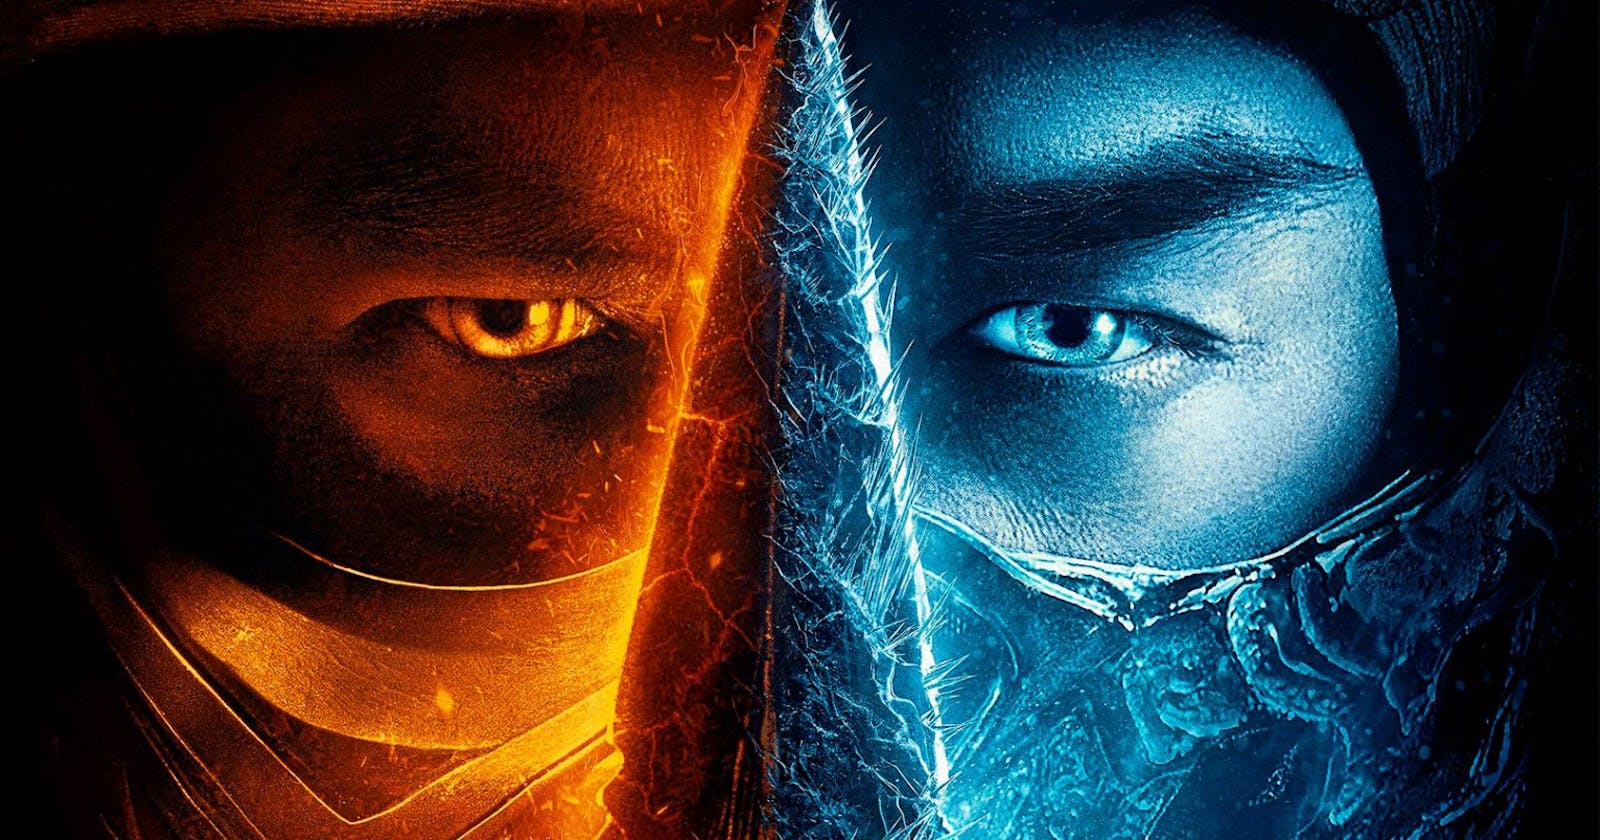 ‘Mortal Kombat’ levels up the action and violence